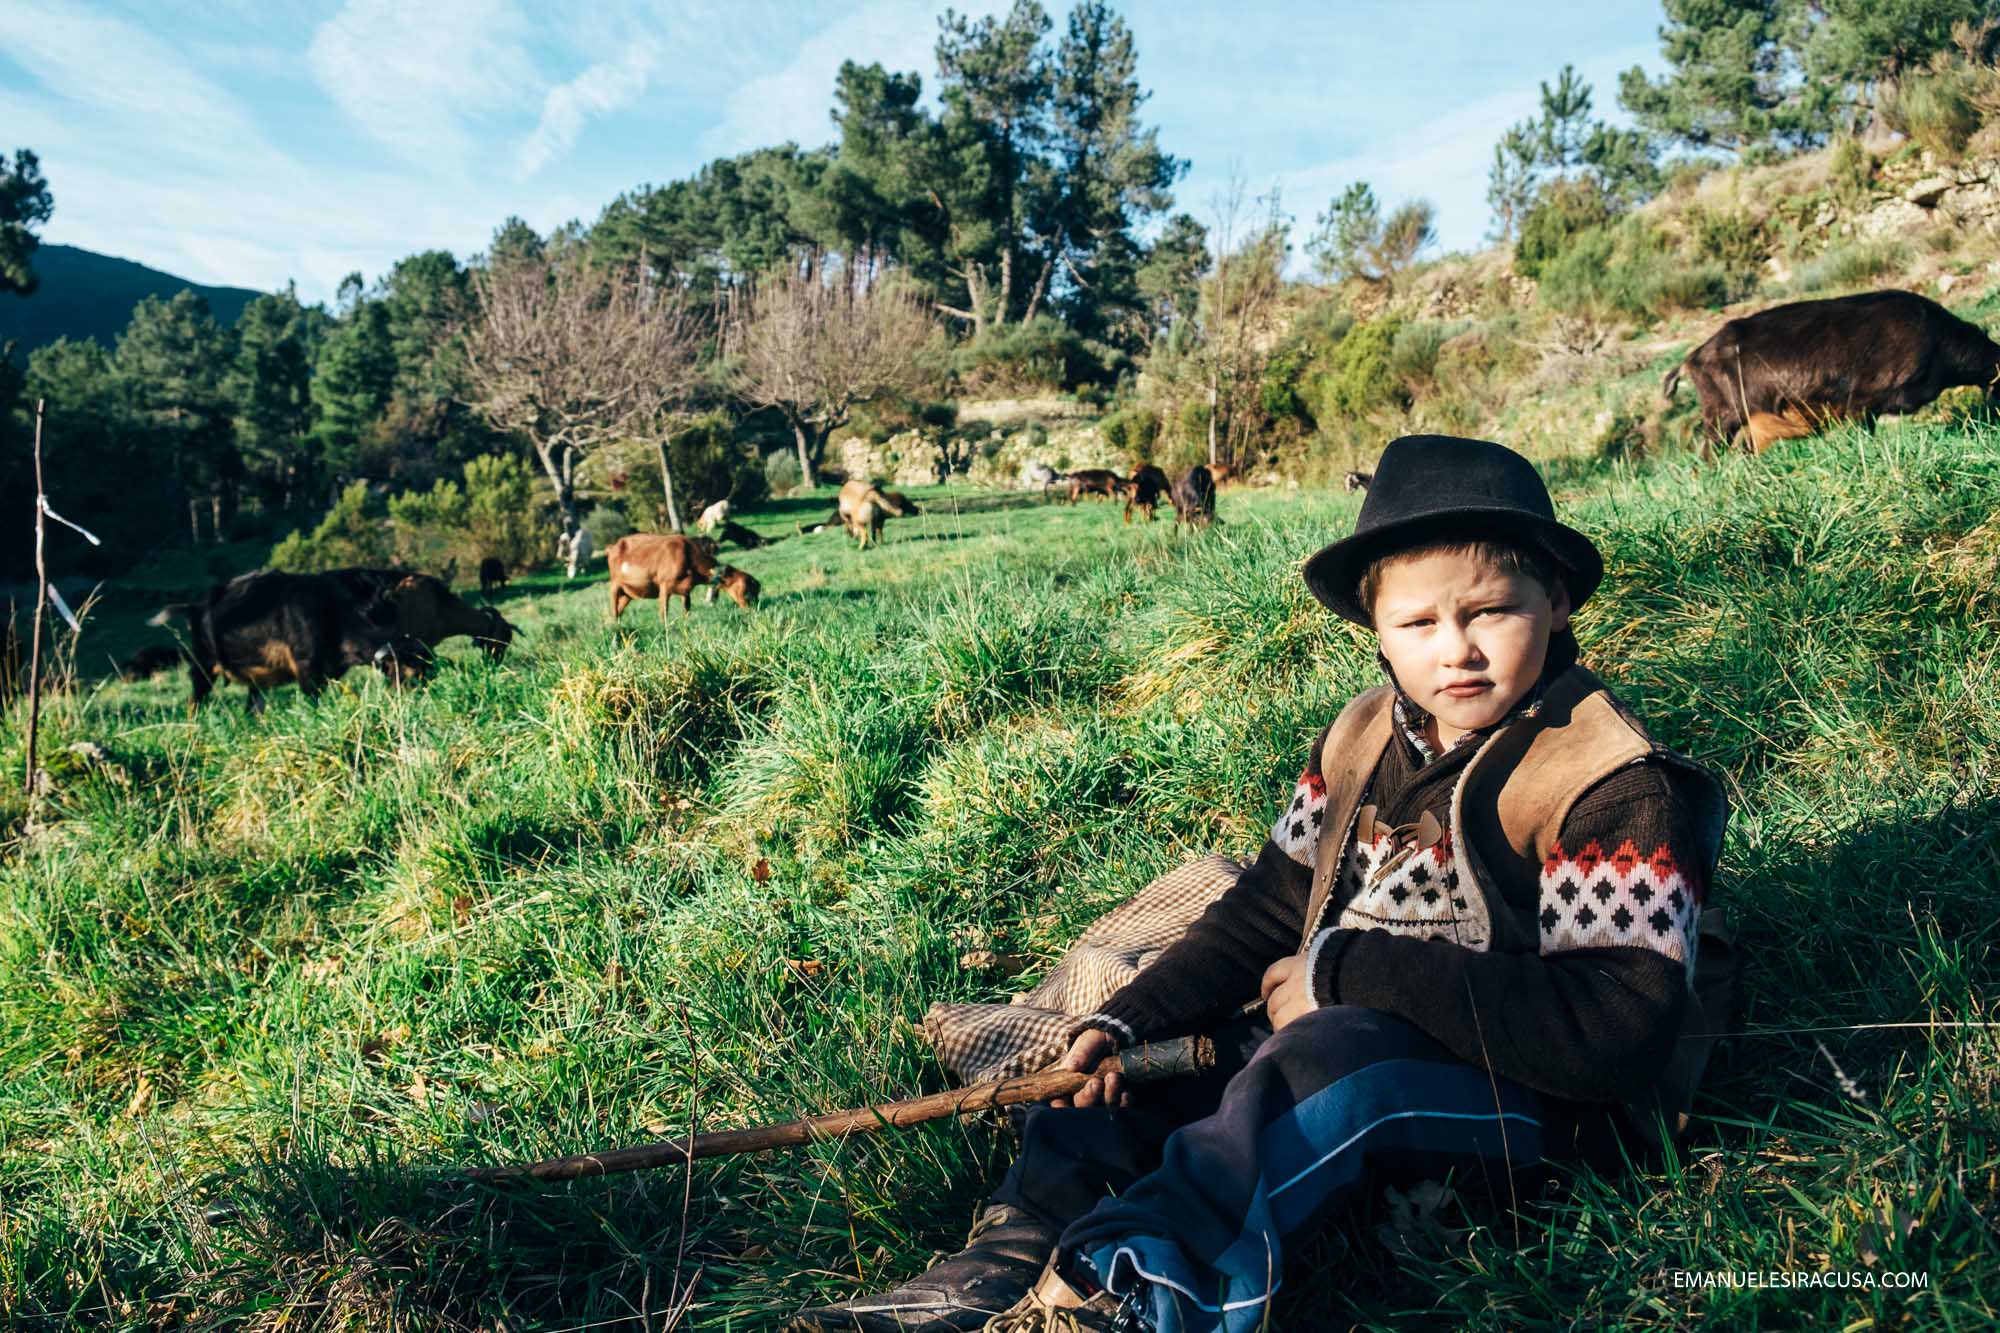 Dinis is only 9 years old but he knows he wants to be a herder. He lives with his mum, his two uncles and his beloved goats. He goes to school during the week, but at weekends he wakes up early, milk the goats and take them out with his uncle Miguel.